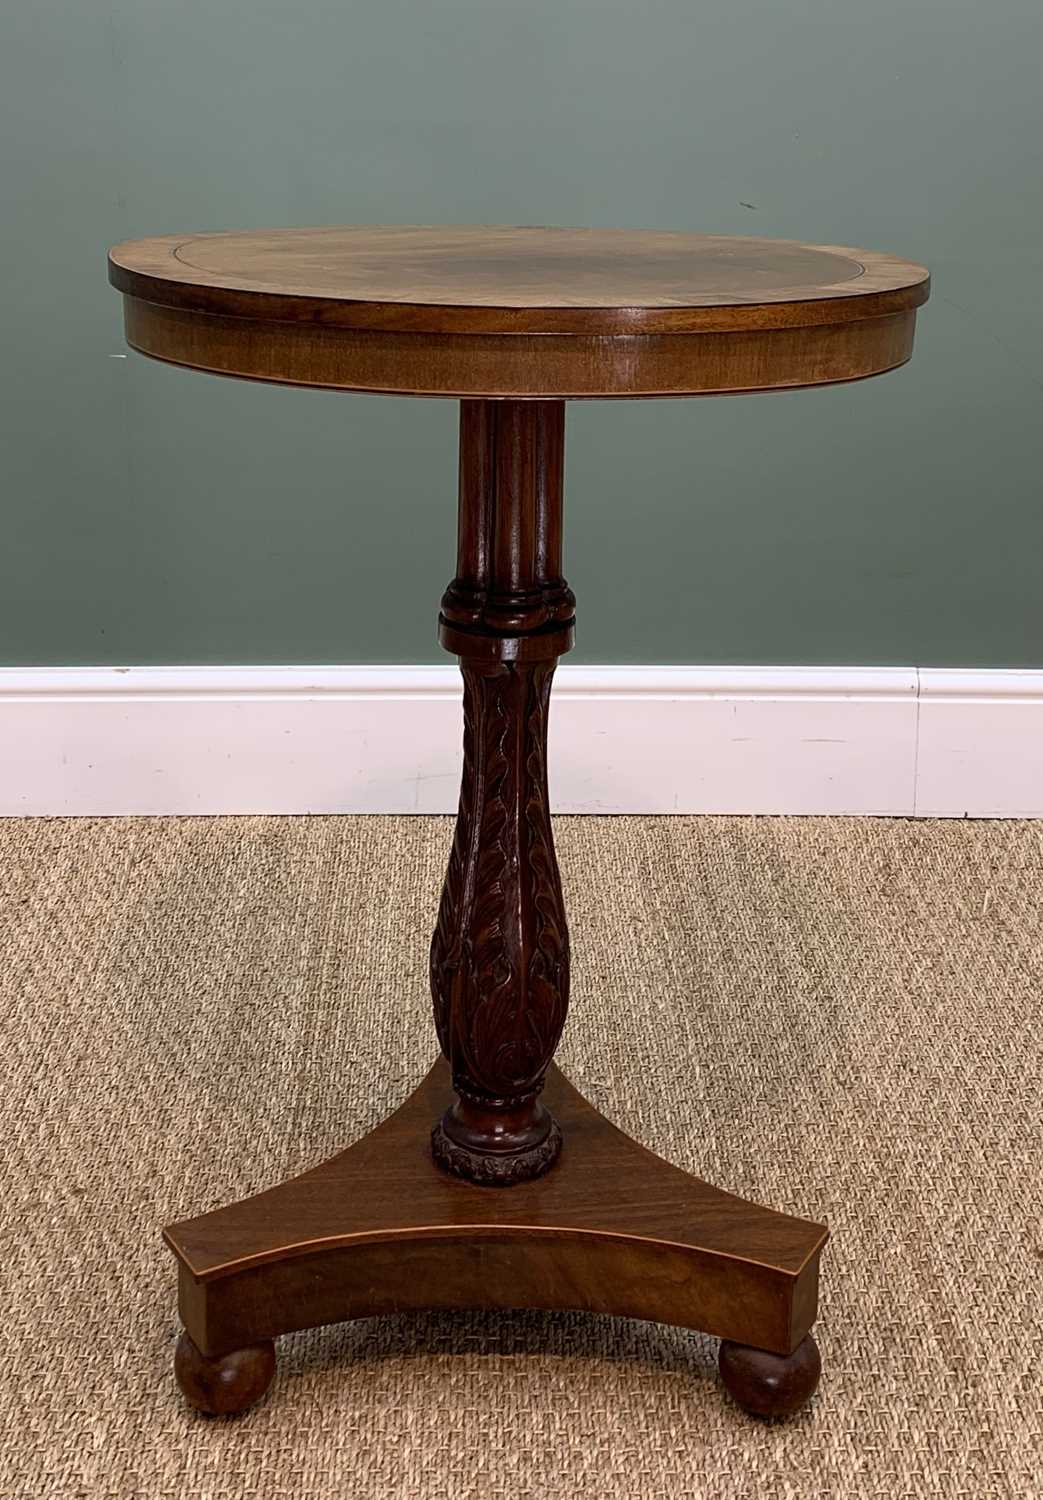 ASSORTED ANTIQUE FURNITURE, including William IV style mahogany tripod table with later carved - Image 2 of 5